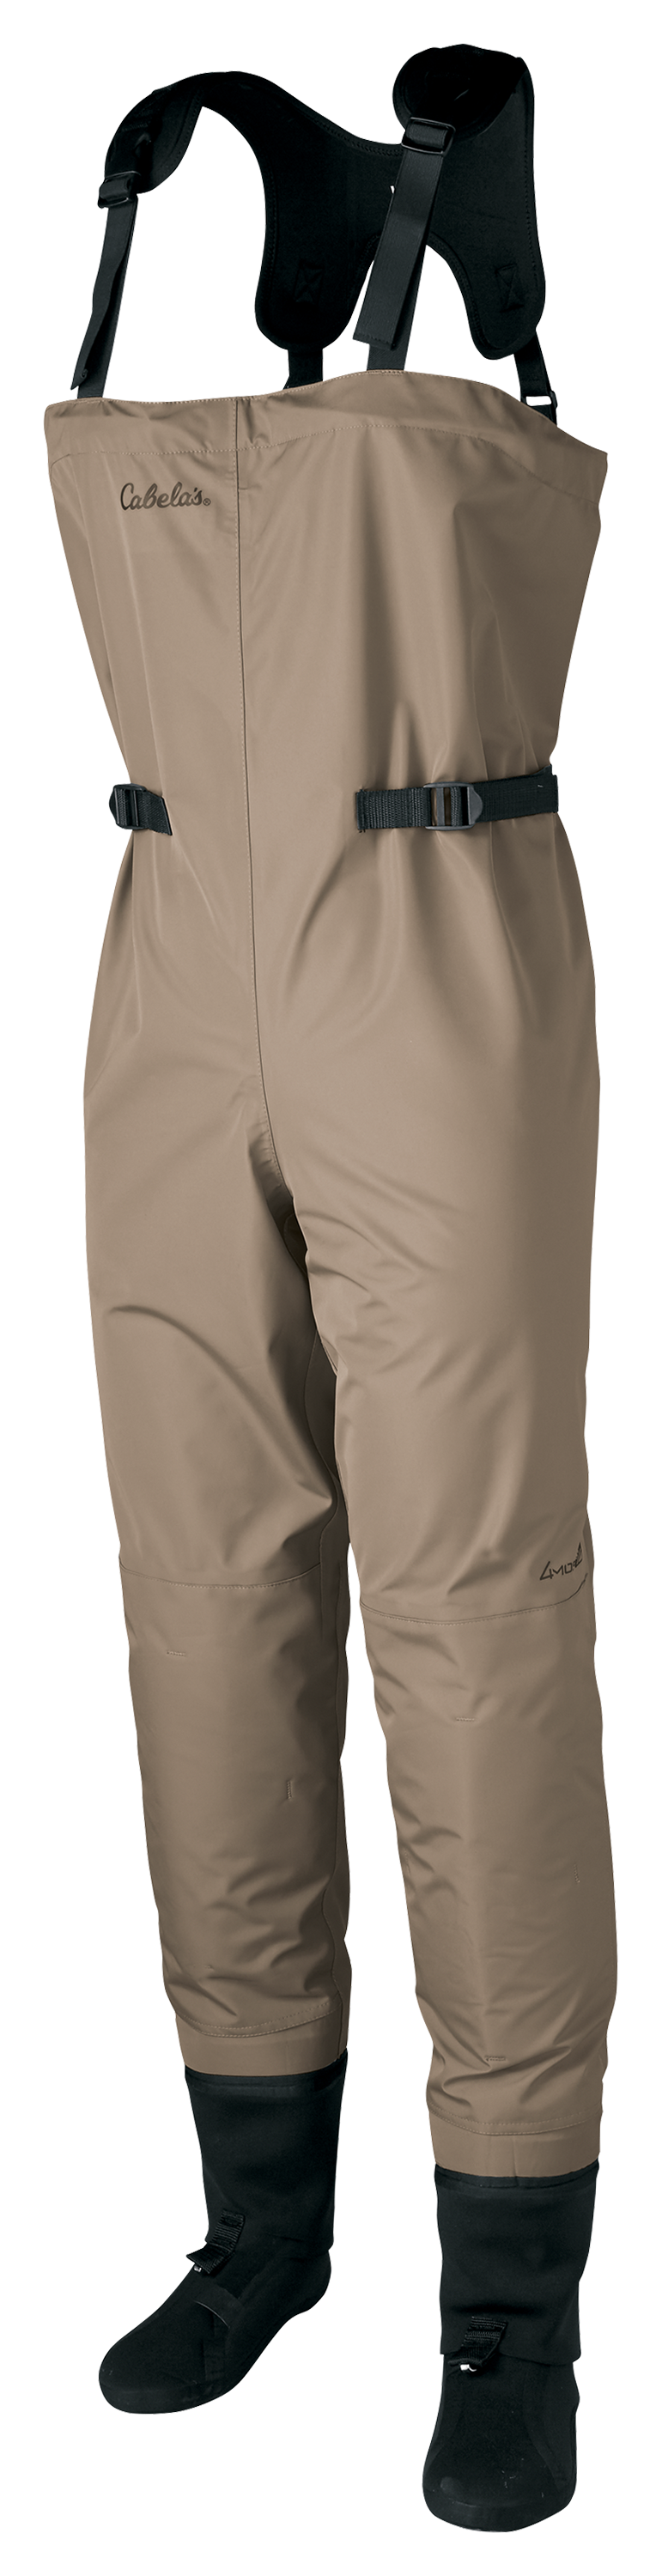 Cabela's Premium Breathable 4MOST DRY-PLUS Stocking-Foot Fishing Waders for Ladies - Light Brown - Extra Large